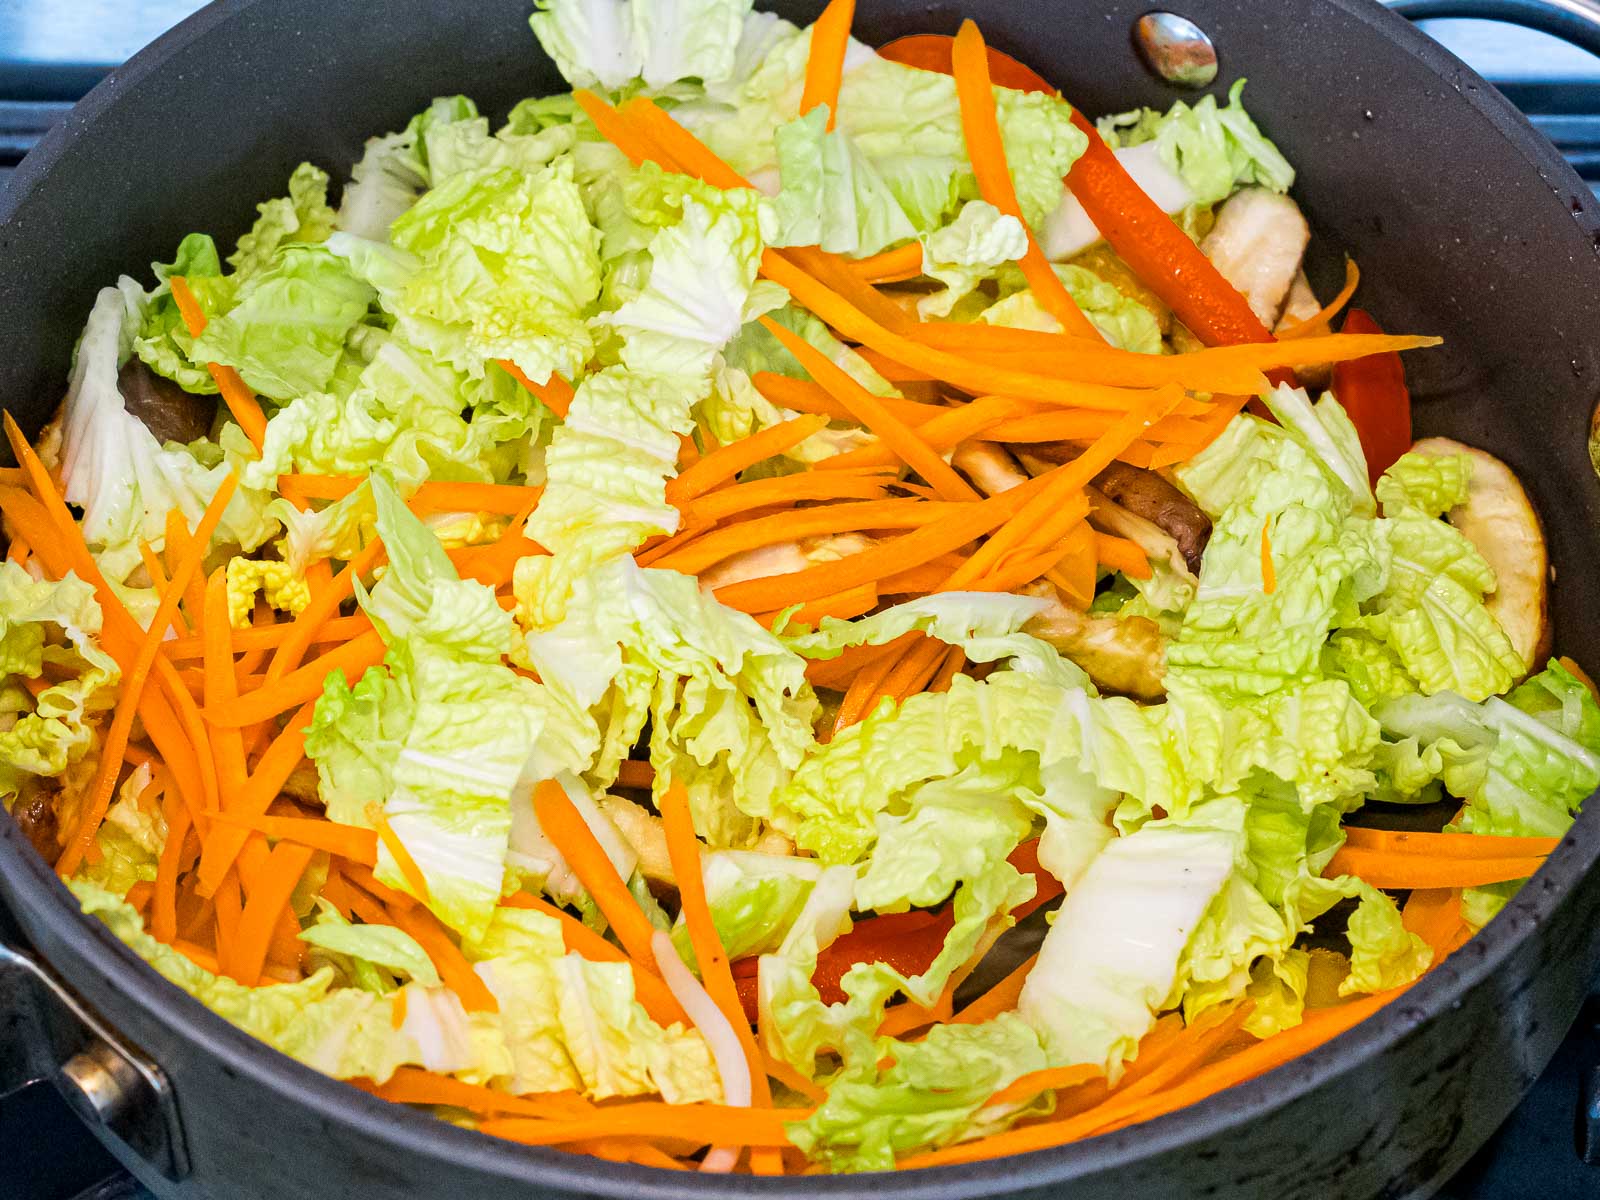 cabbage, carrots, and other vegetables stir fried in a pan